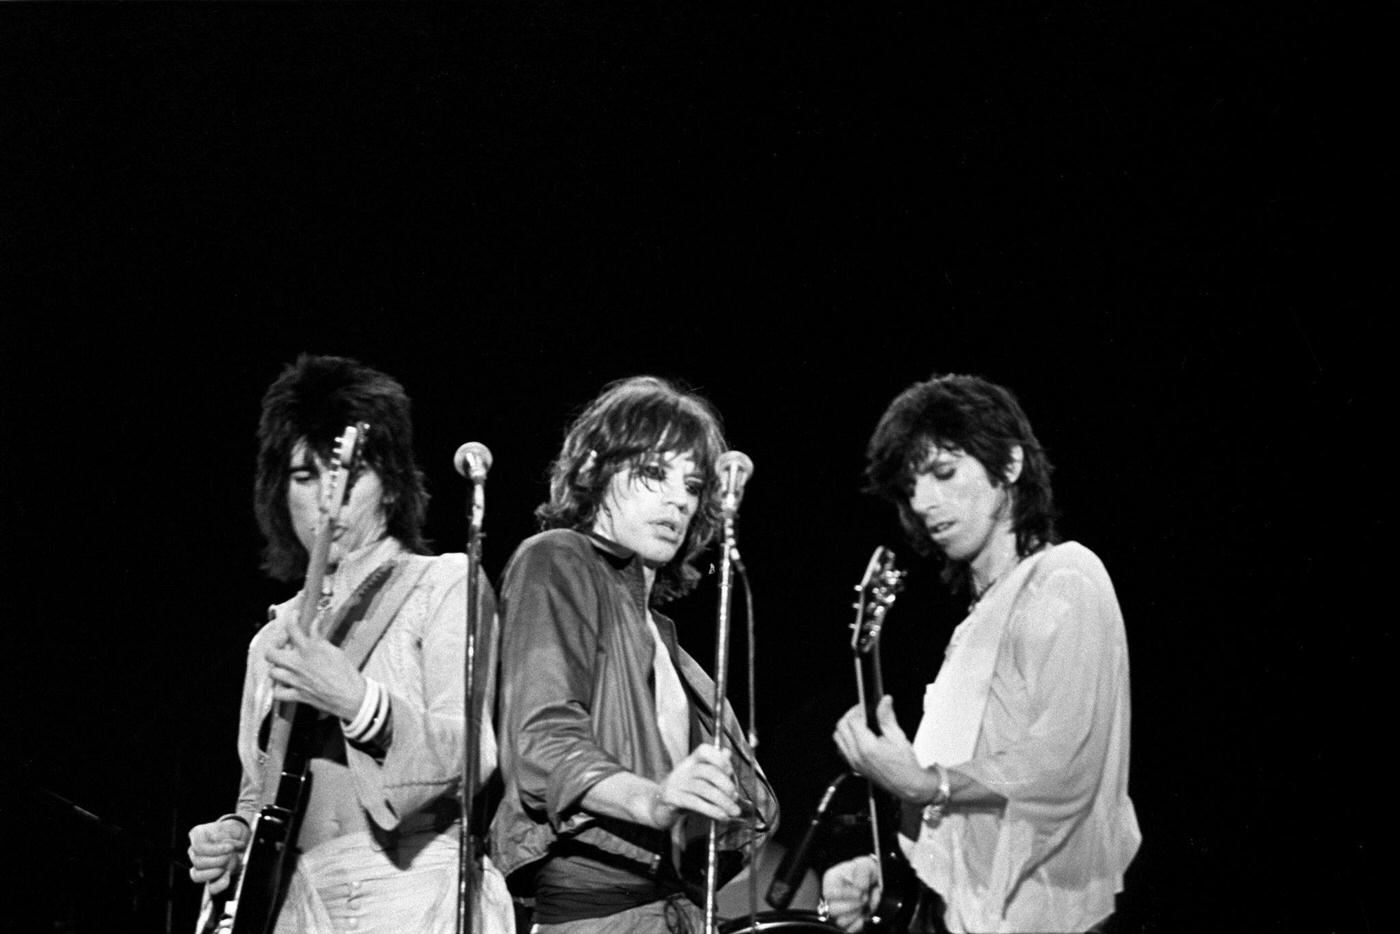 Ronnie Wood, Mick Jagger, and Keith Richards perform on stage at Madison Square Garden during the band's "Tour of America '75" on July 23, 1975, in New York, New York.